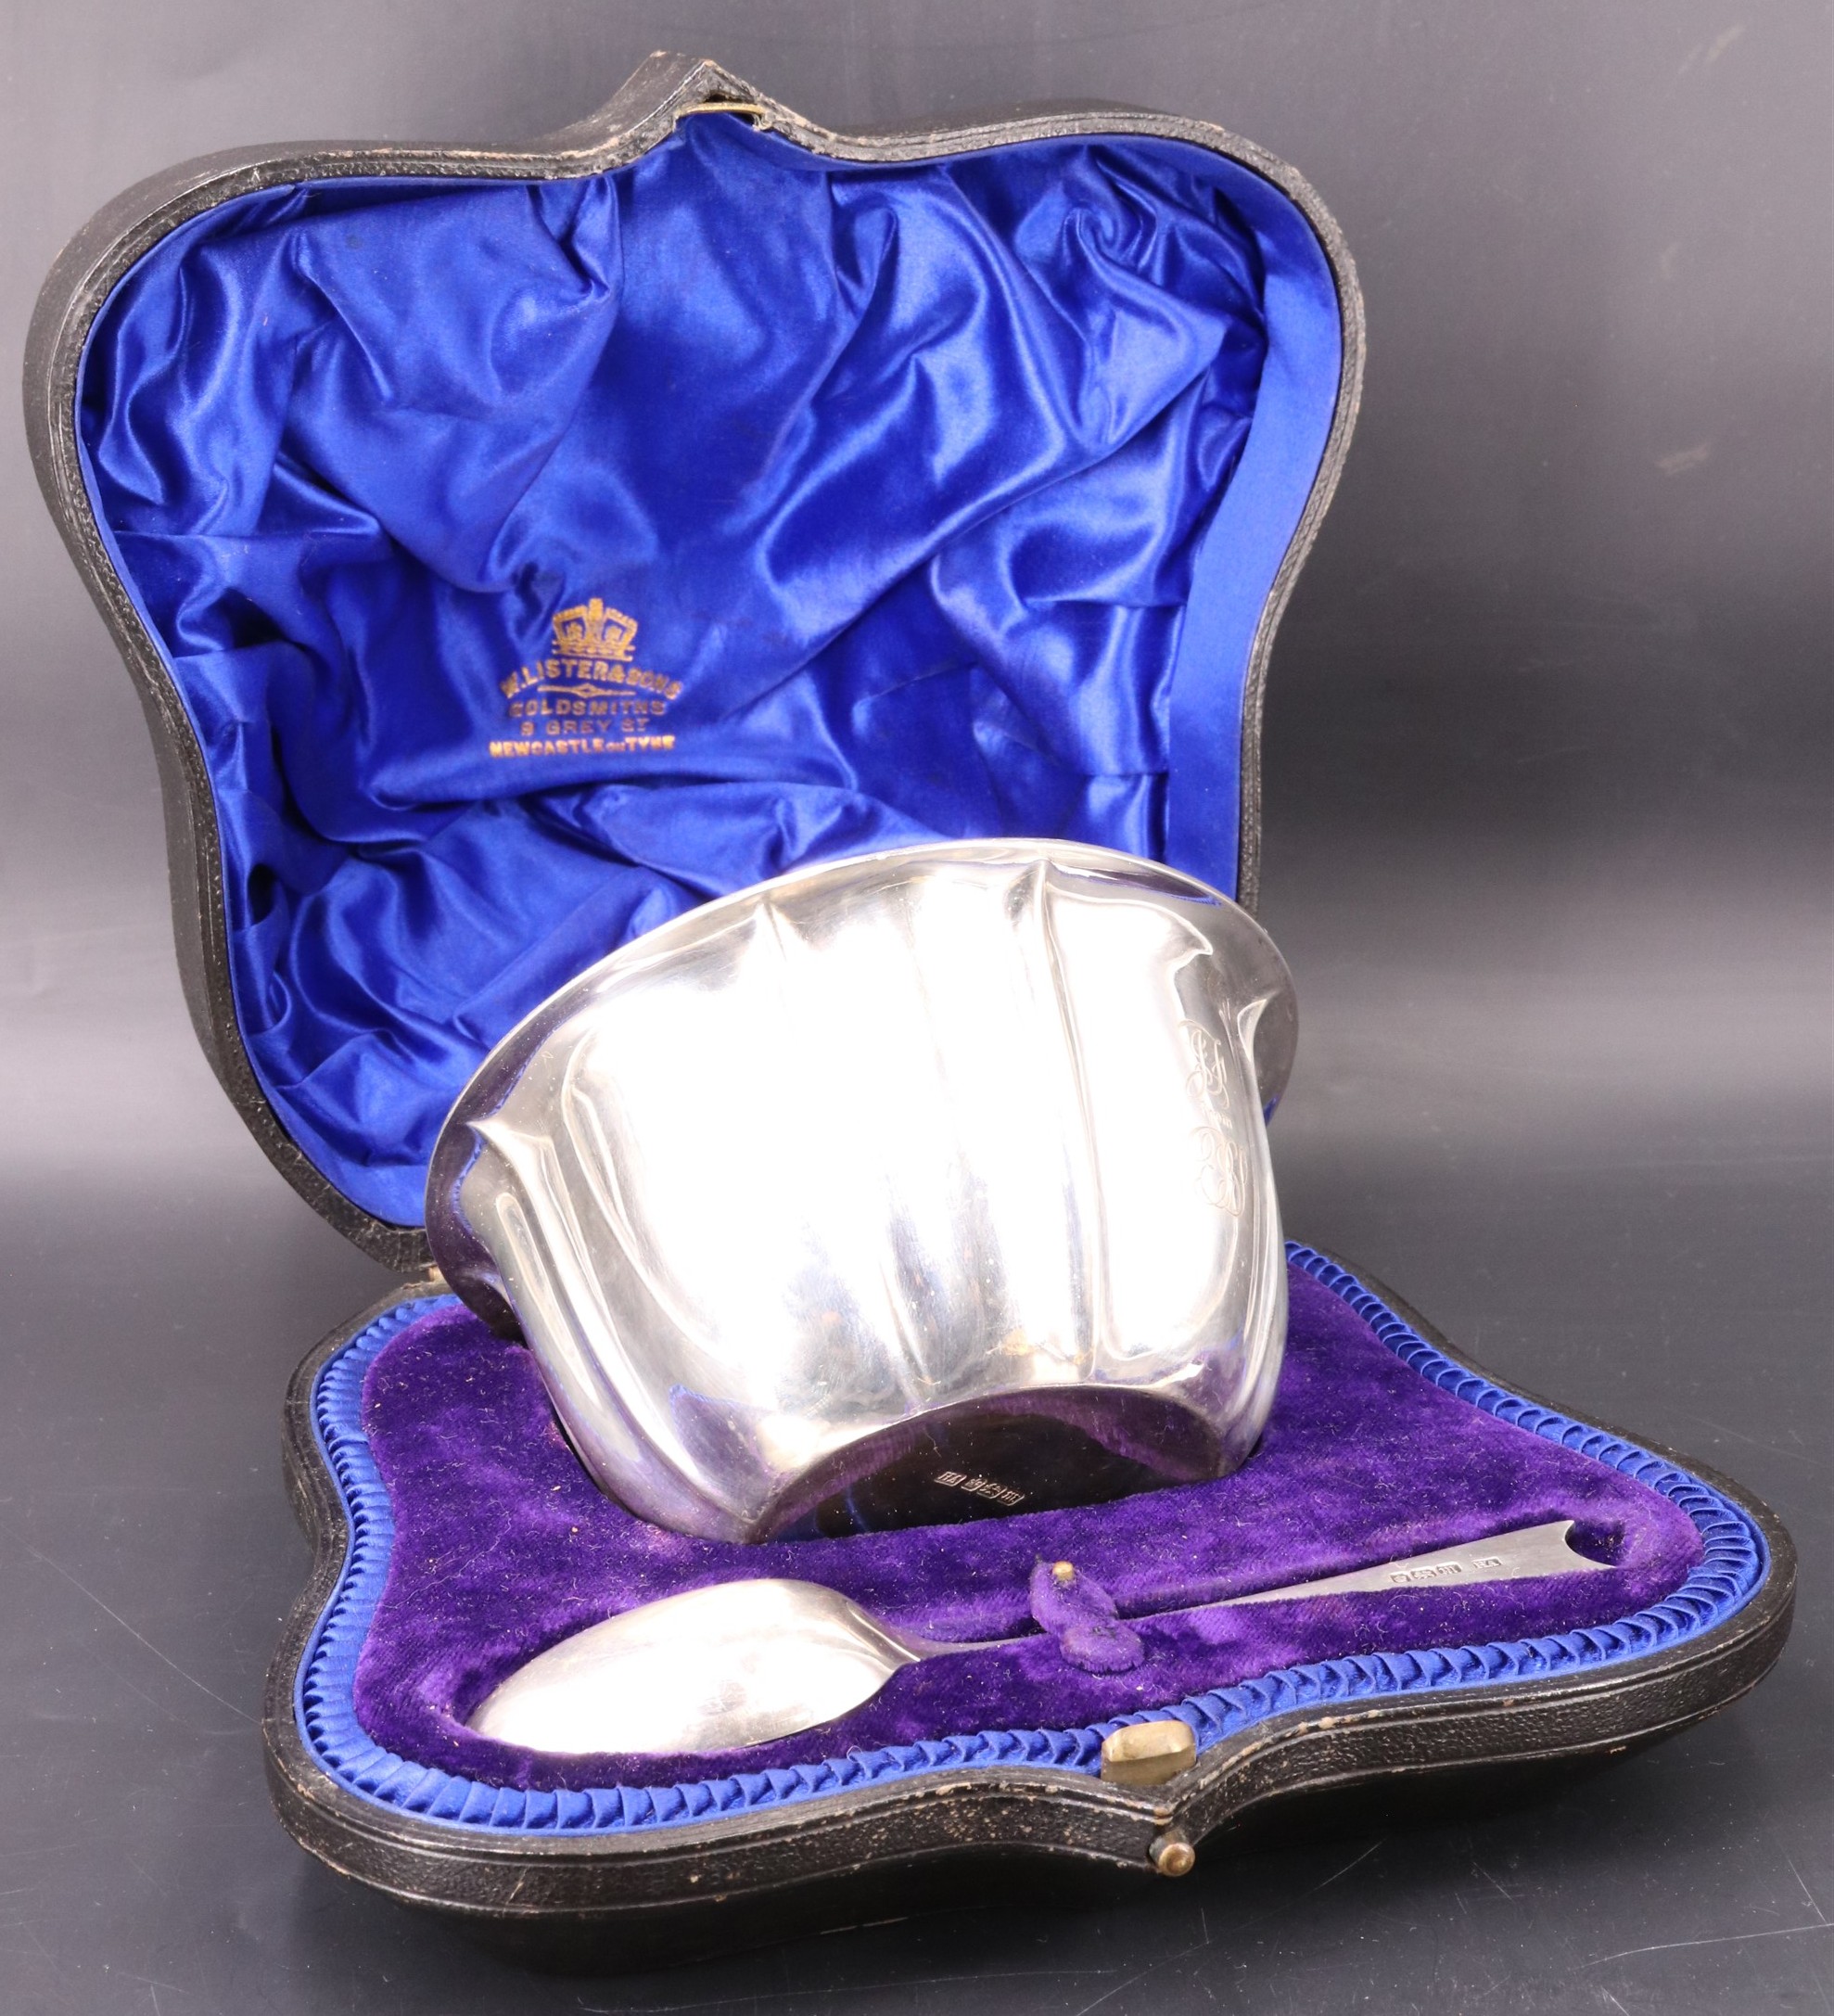 A cased Edwardian silver christening bowl and spoon, Atkin Brothers, Sheffield, 1904, 178 g gross,